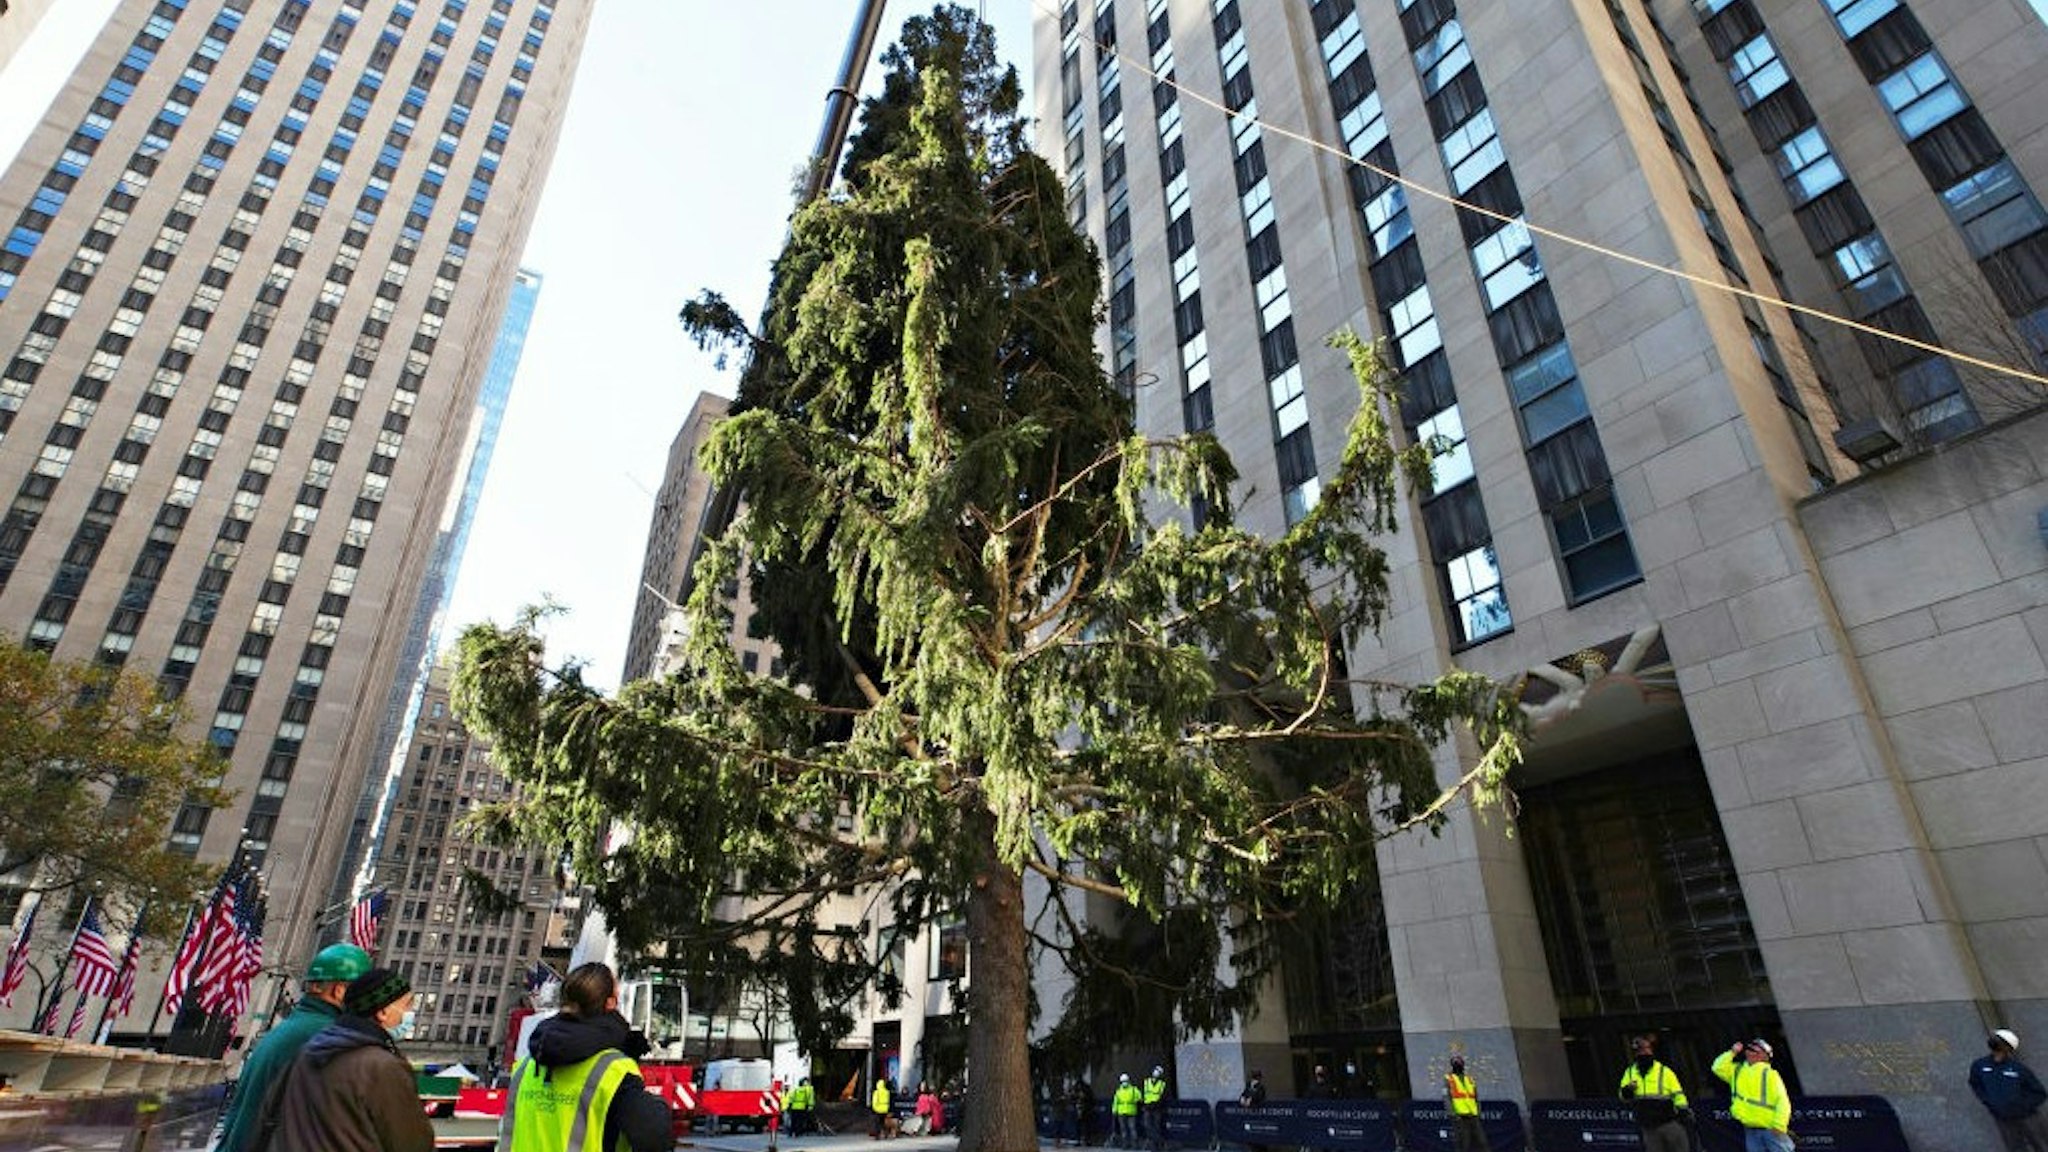 NEW YORK, NEW YORK - NOVEMBER 14: The Rockefeller Center Christmas Tree arrives at Rockefeller Plaza and is craned into place on November 14, 2020 in New York City. (Photo by